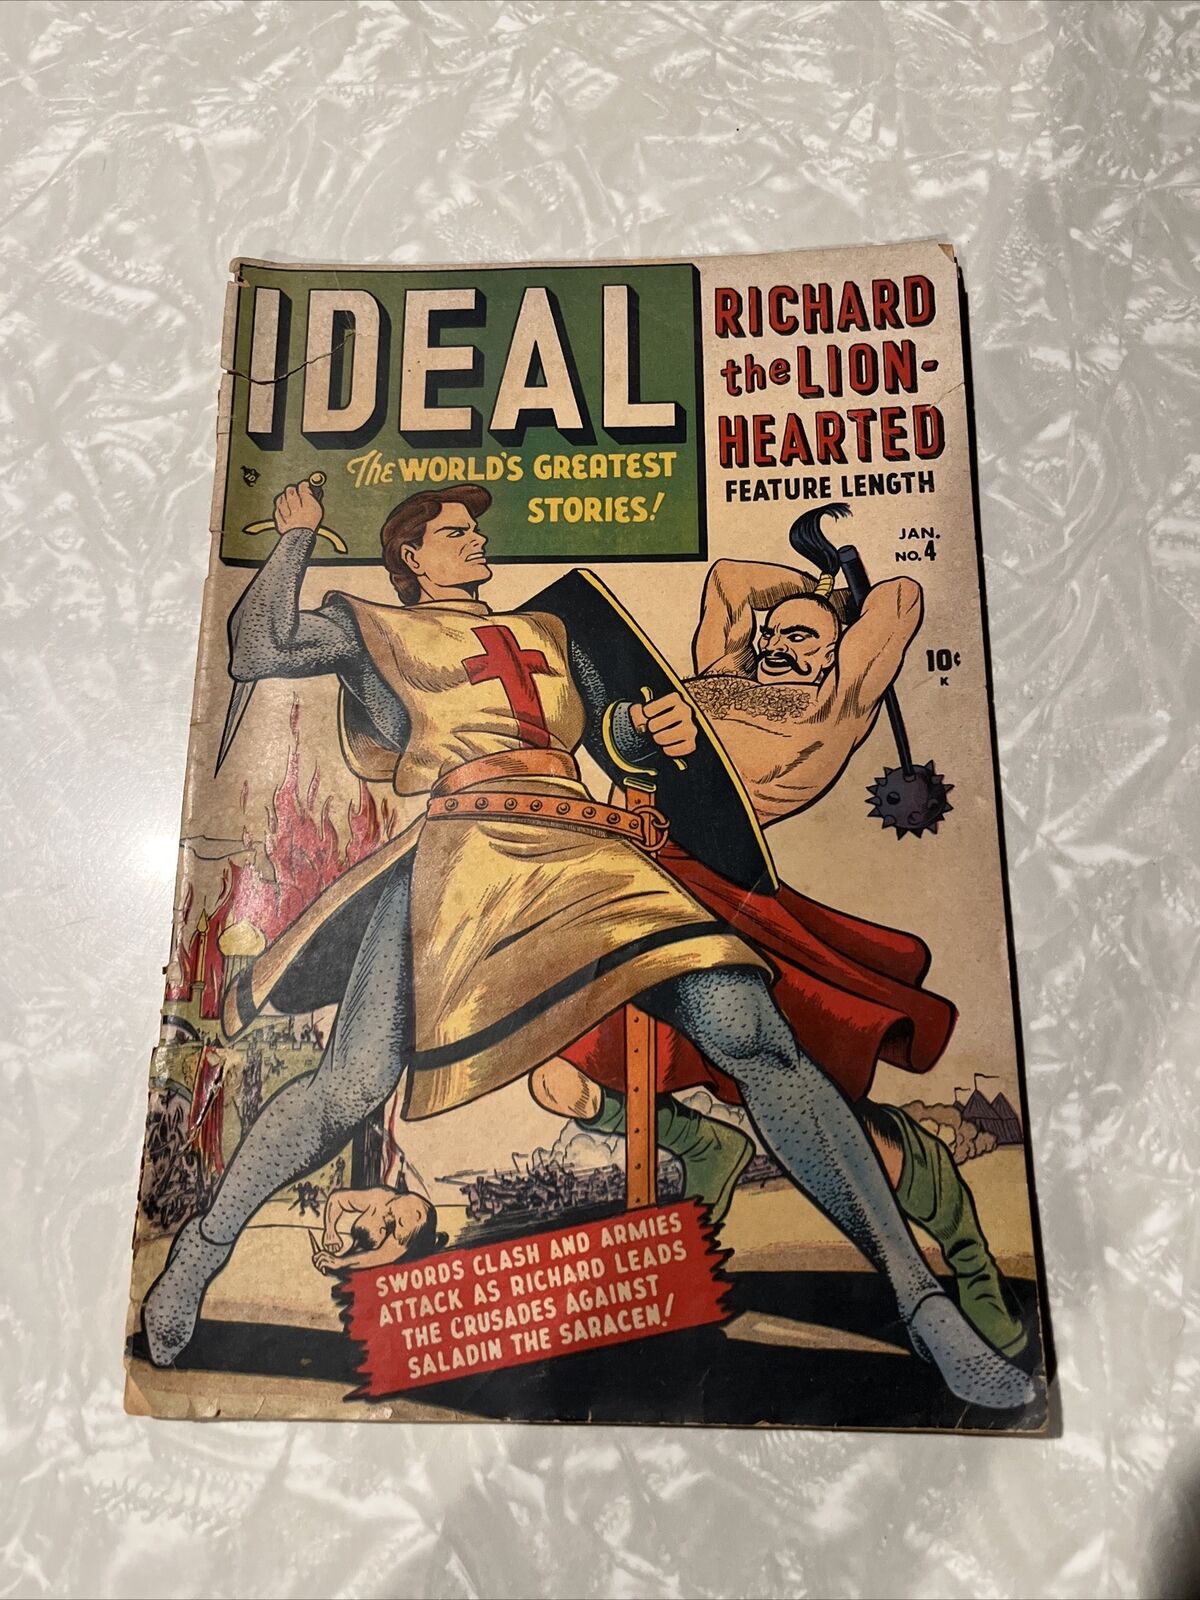 TIMELY: IDEAL #4, RICHARD THE LION-HEART, FEAT: THE WITNESS-COLAN/LEE, 1949, VG-